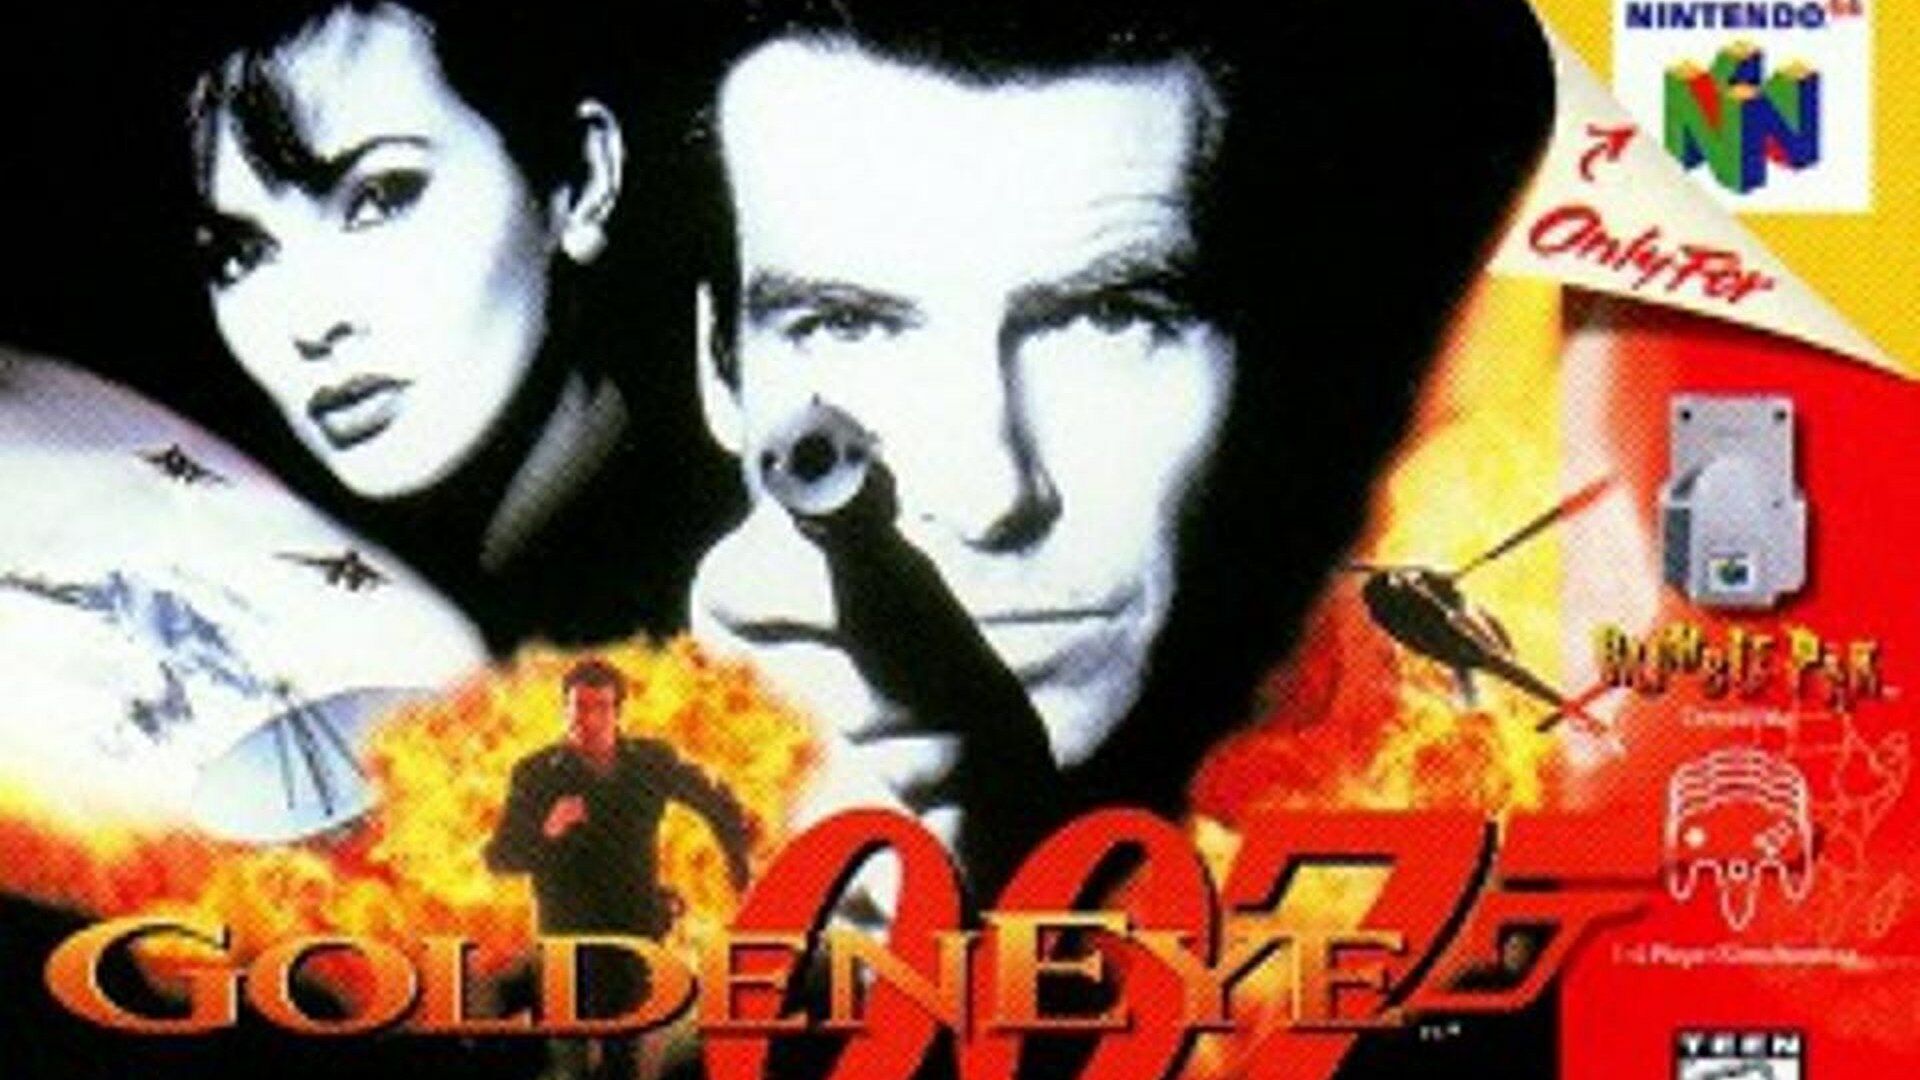 Oh Goldeneye, why are you breaking my heart?